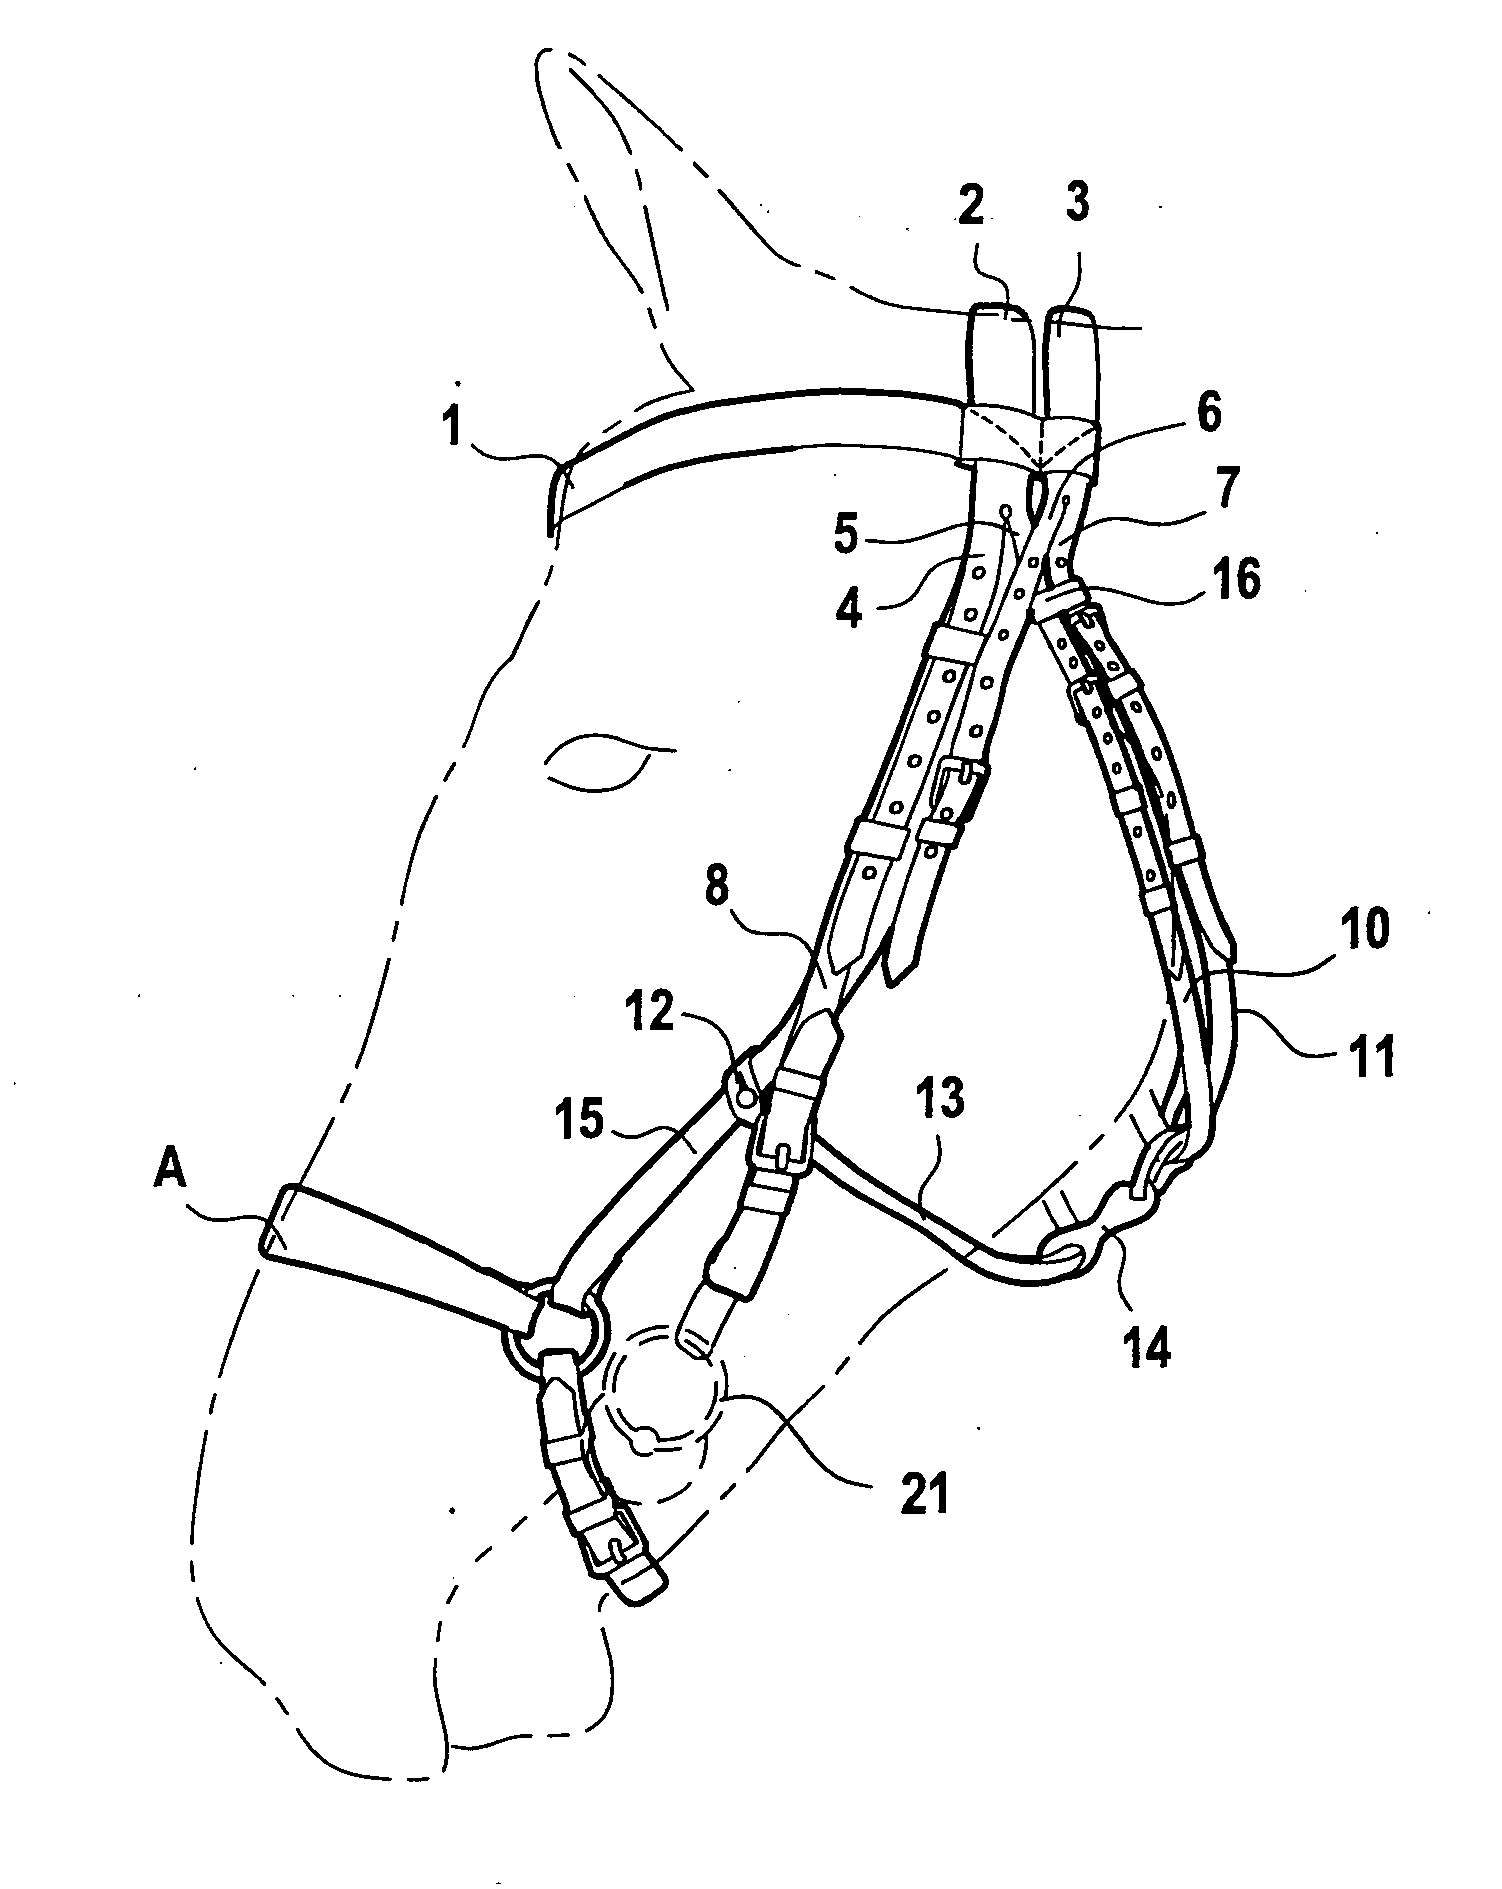 Head Harness for a Horse